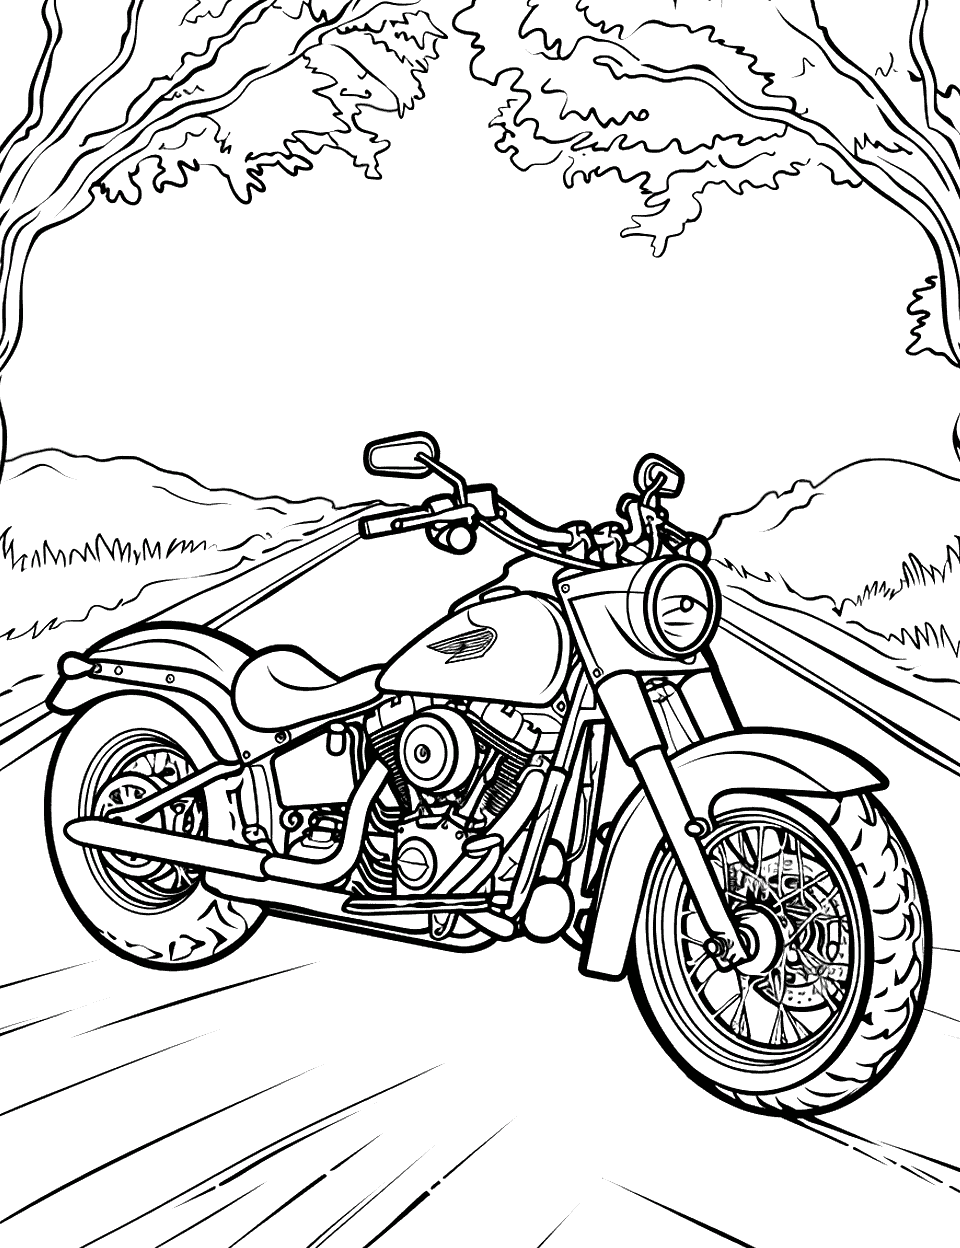 Honda Motorcycle Journey Coloring Page - A Honda motorcycle parked on a long road through the forest.